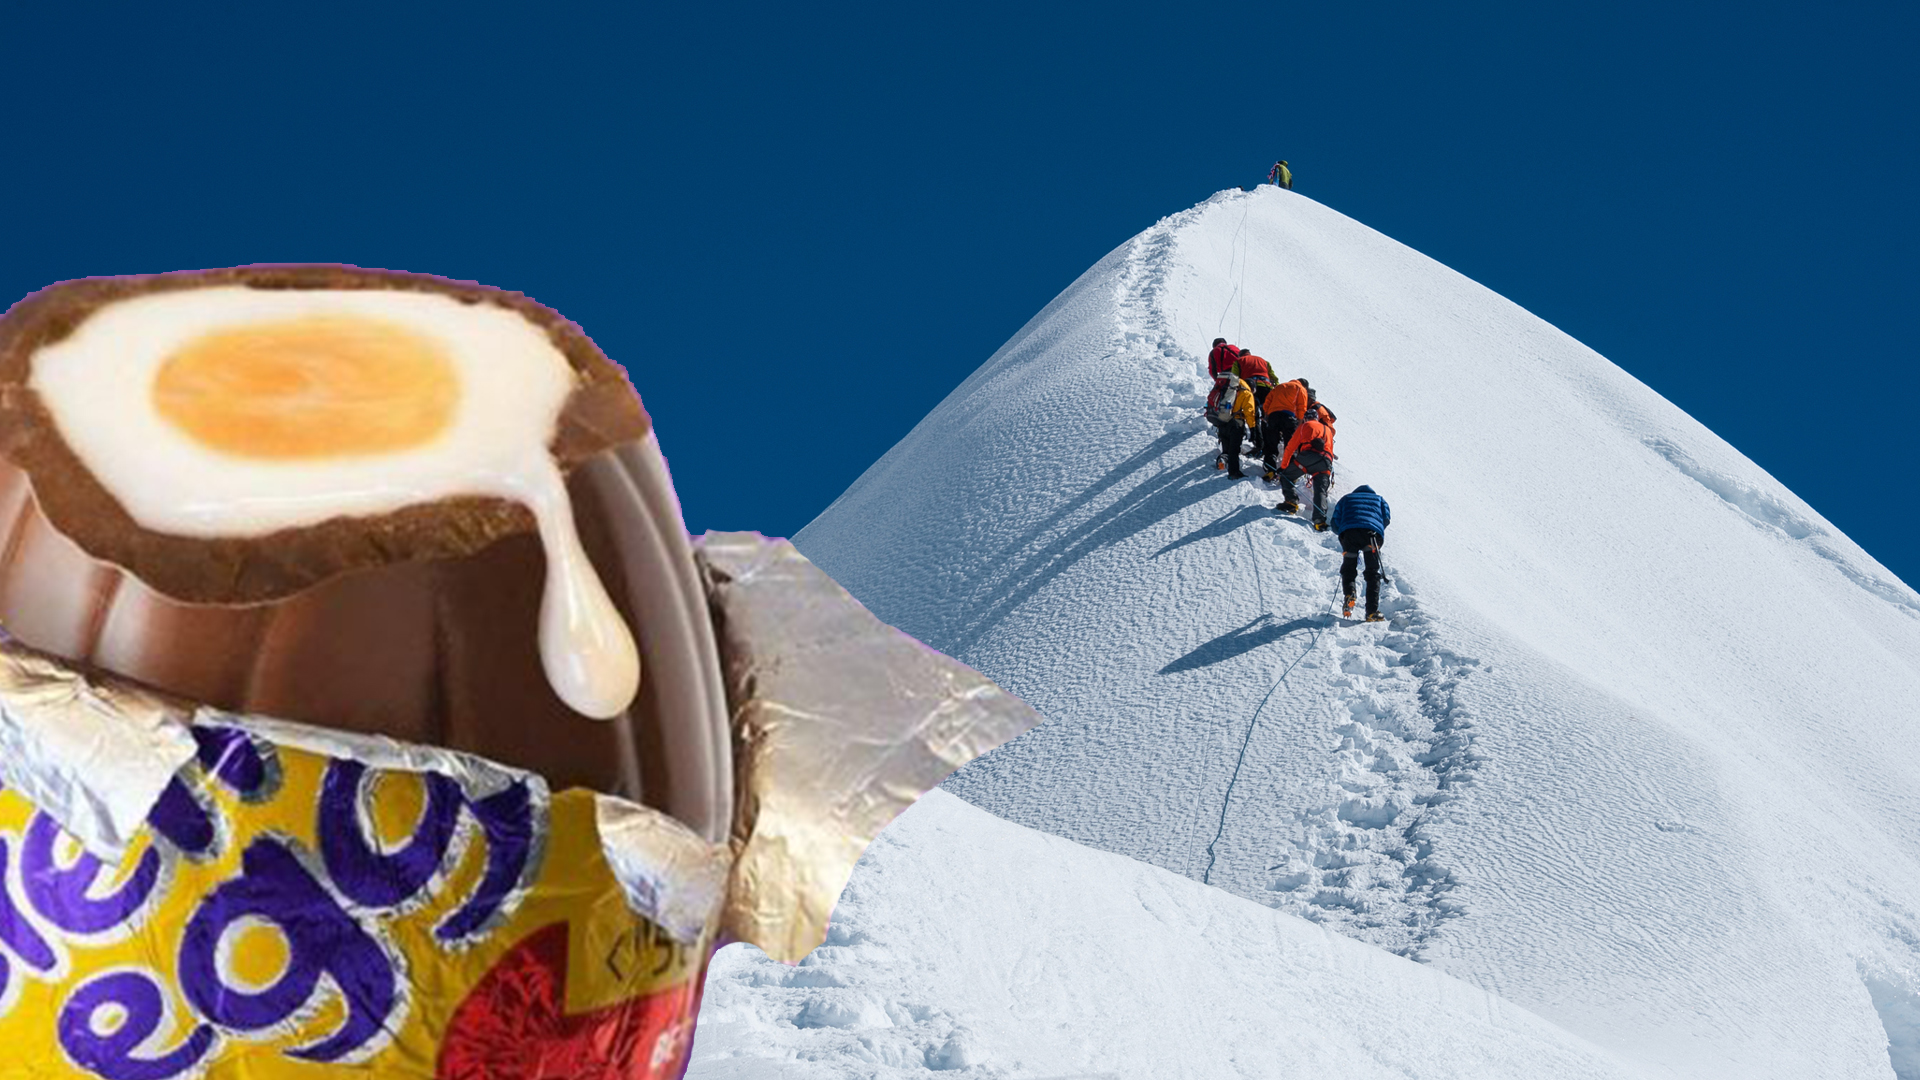 A massive Creme Egg and Mount Everest